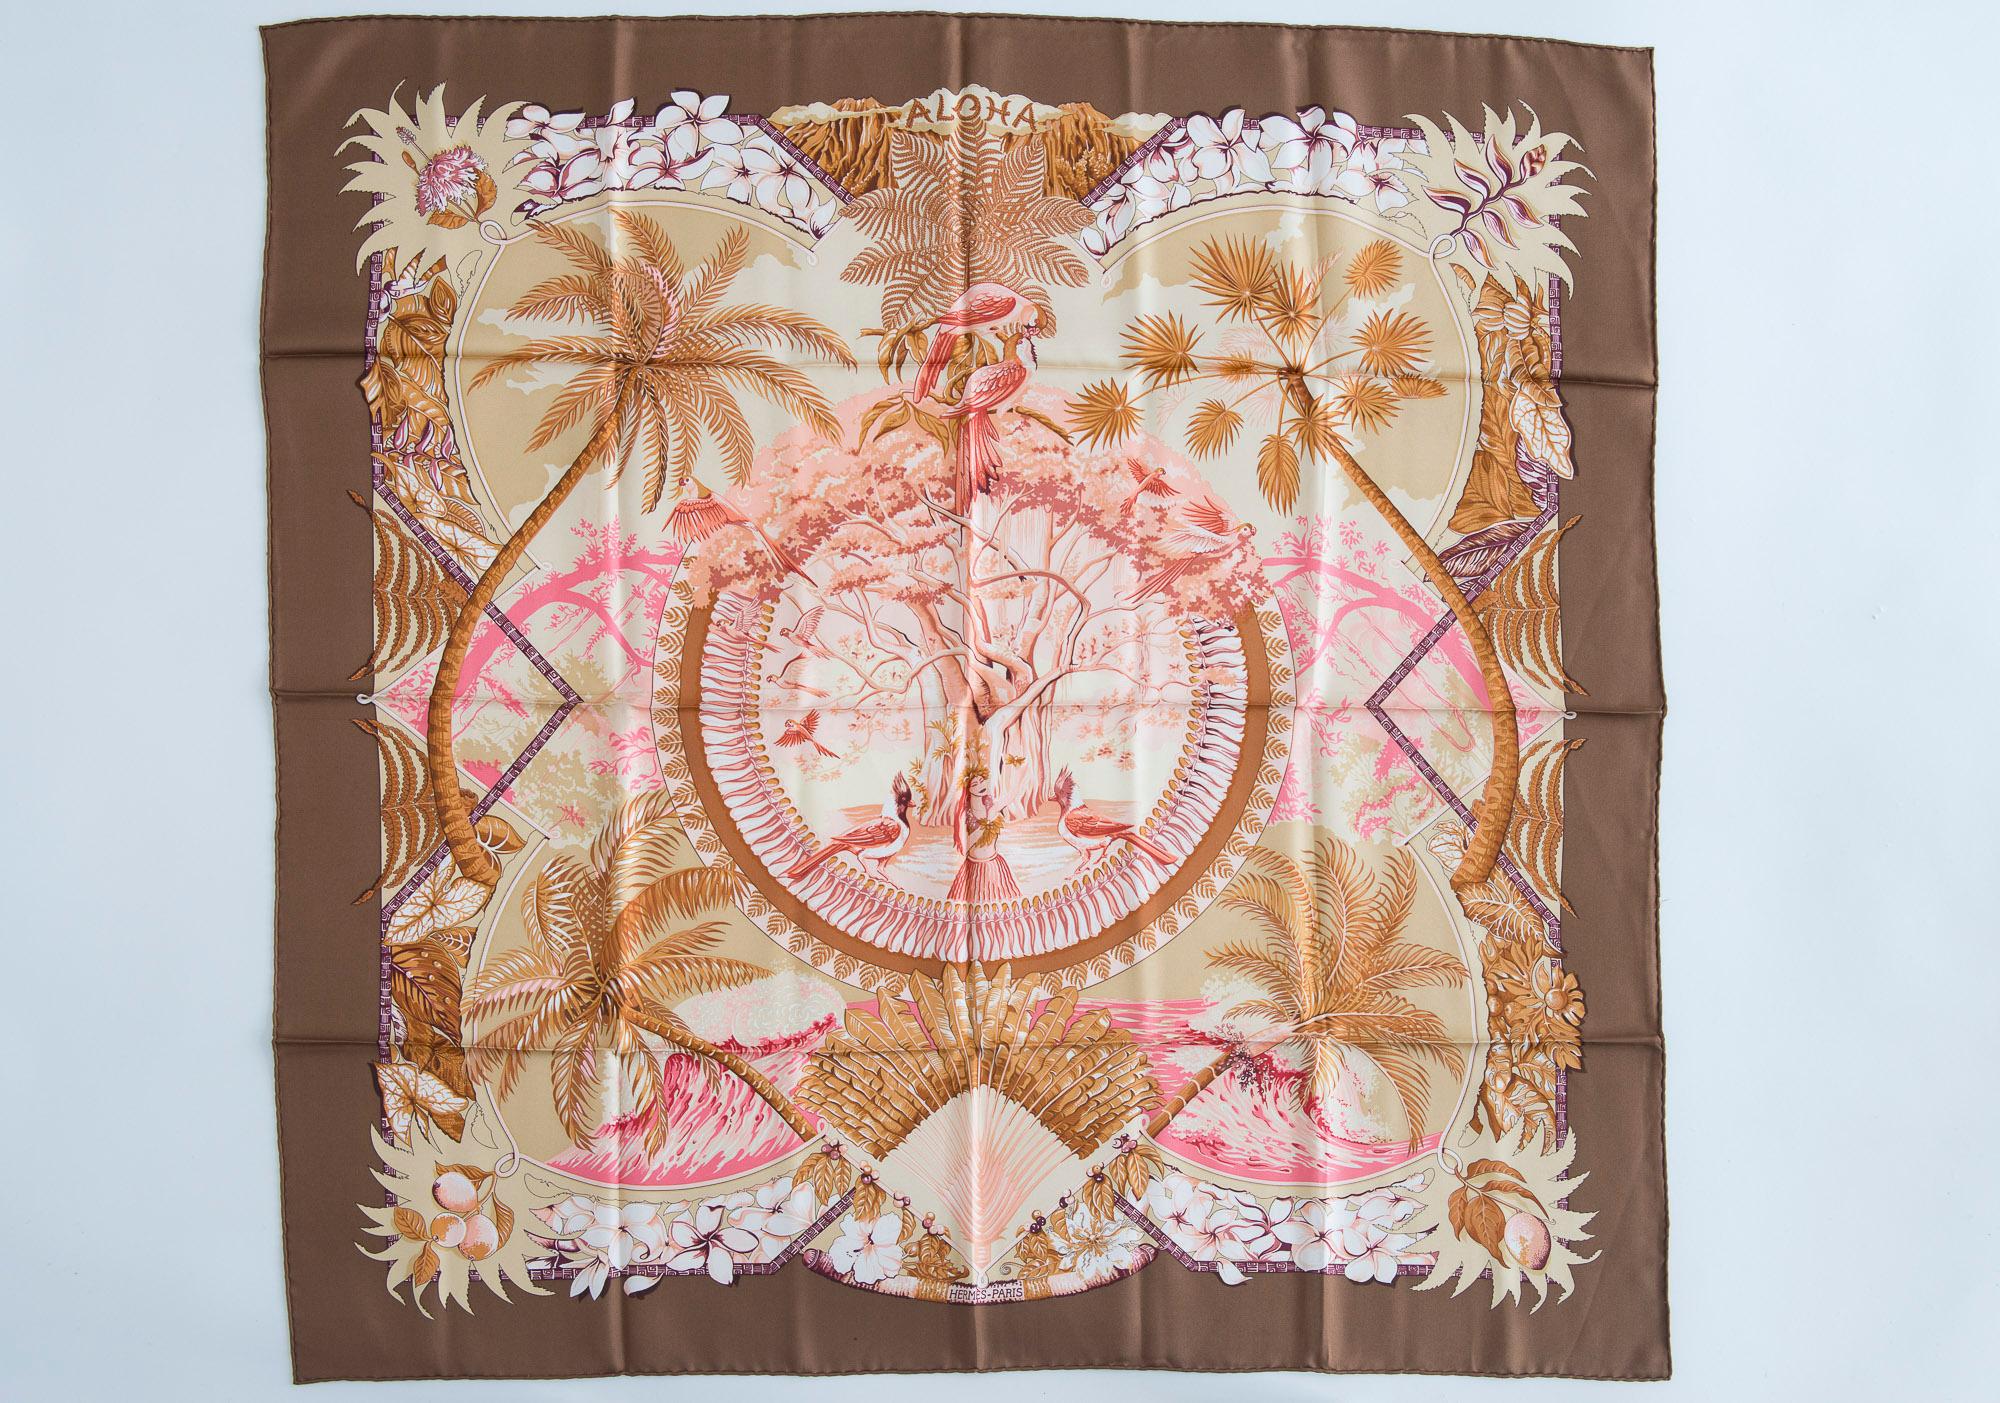 Authentic Hermès Aloha 90 cm silk scarf in a rare colorway. Originally designed by Bourthomieux in 2000, the print features a taupe border with beautiful shades of pink at the center design. Tropical theme with palm trees, exotic birds and hula